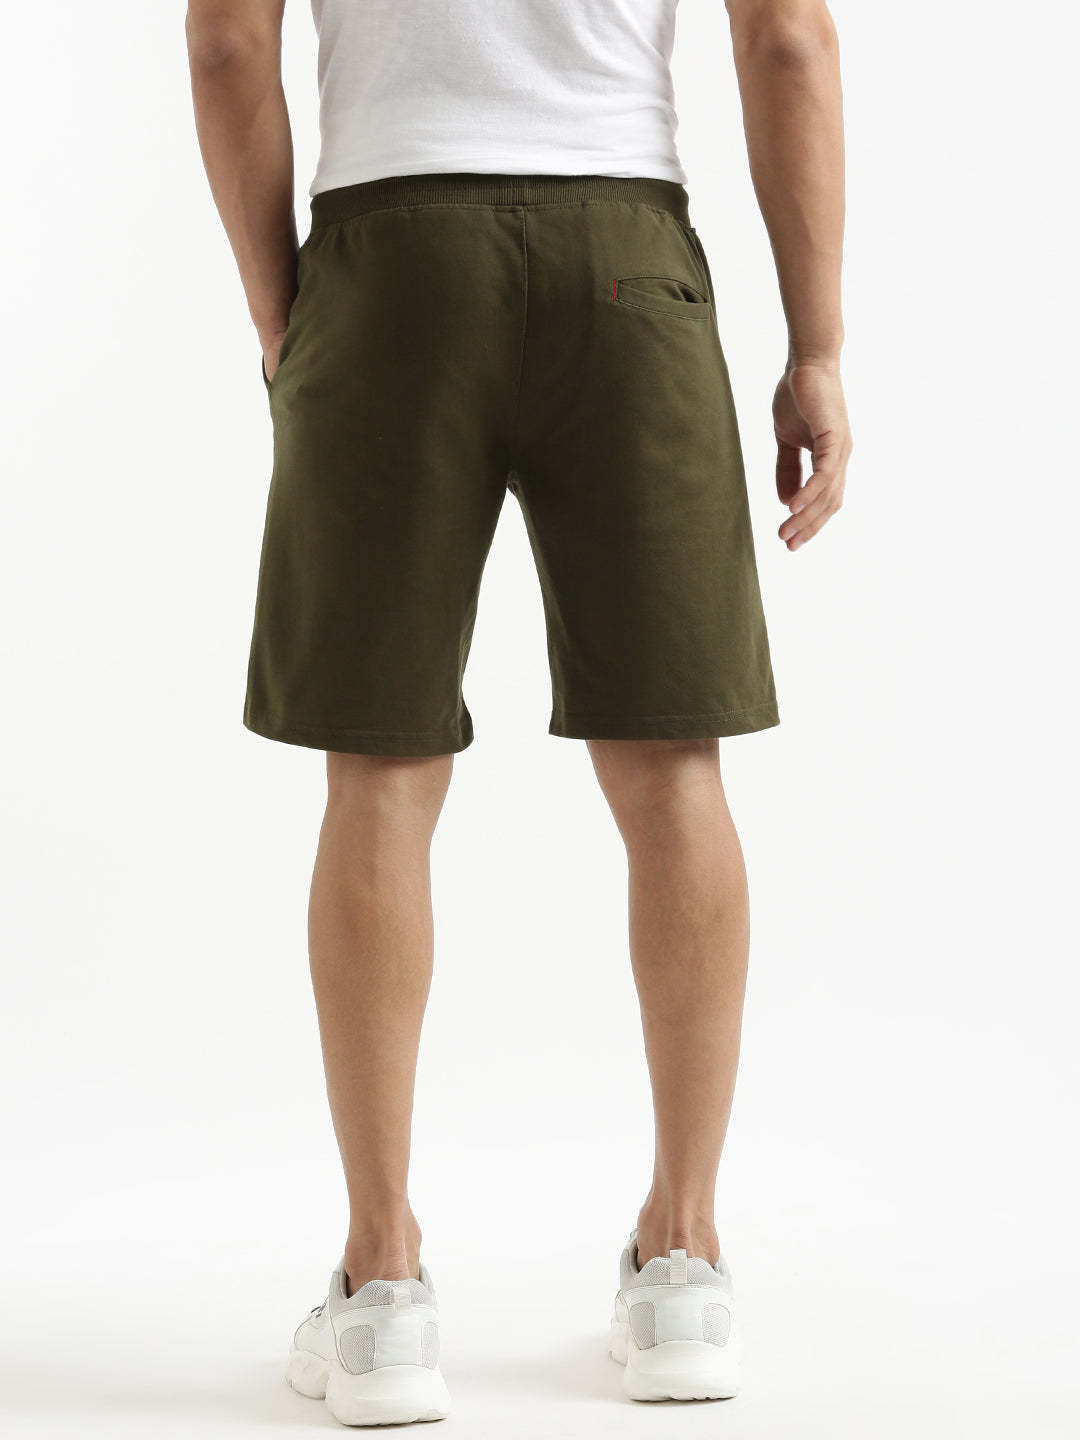 Printed Comfort Solid Olive Shorts